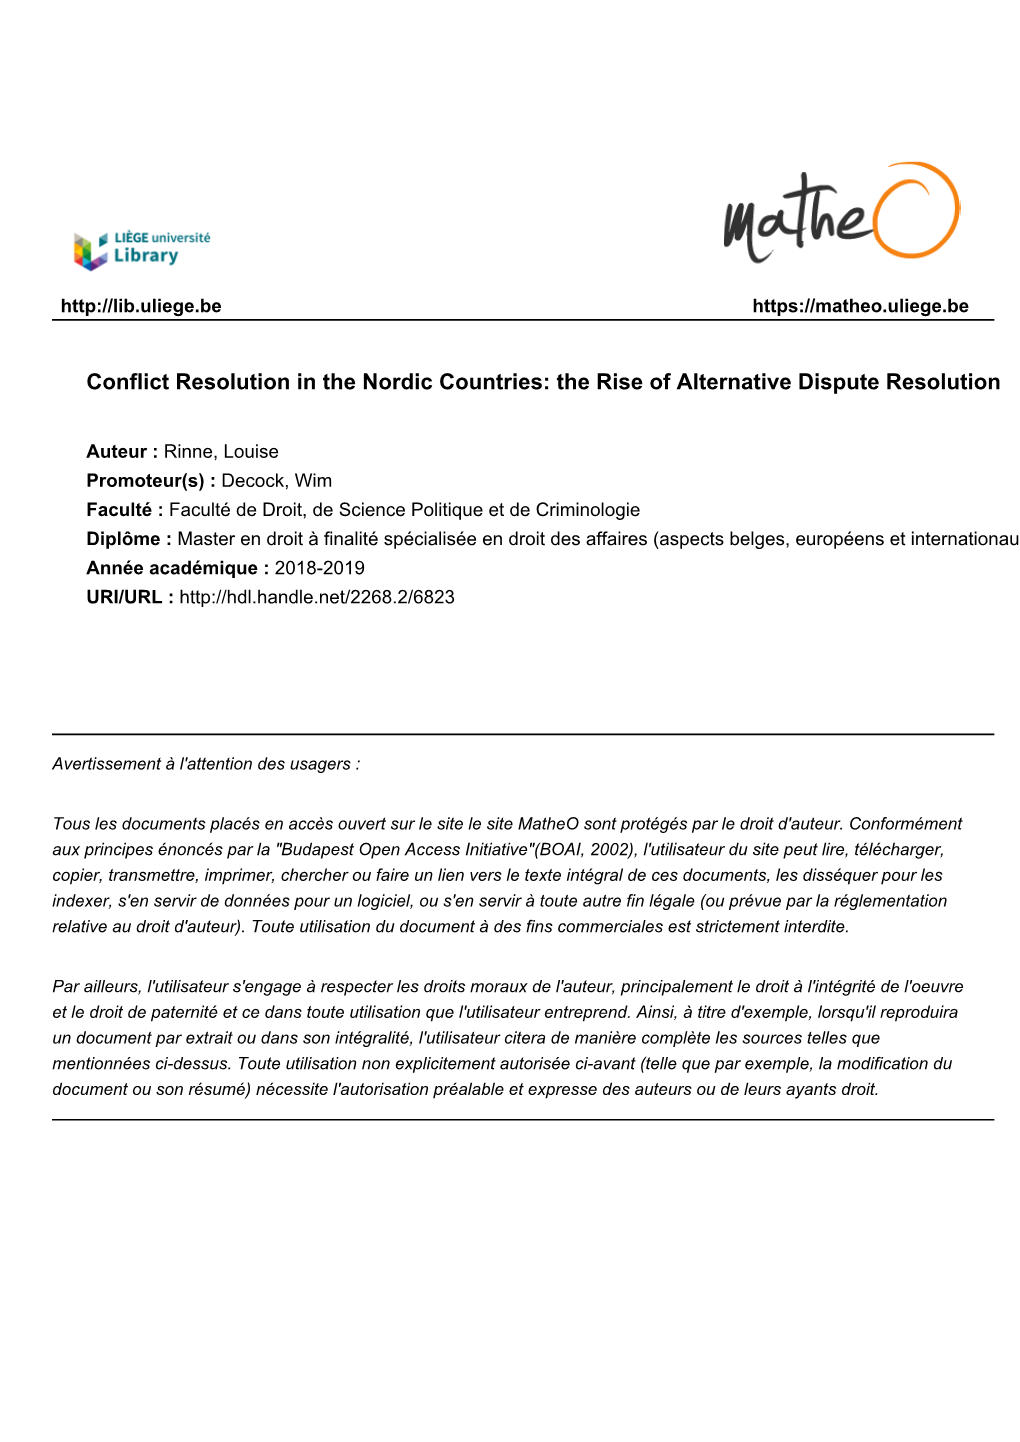 Conflict Resolution in the Nordic Countries: the Rise of Alternative Dispute Resolution